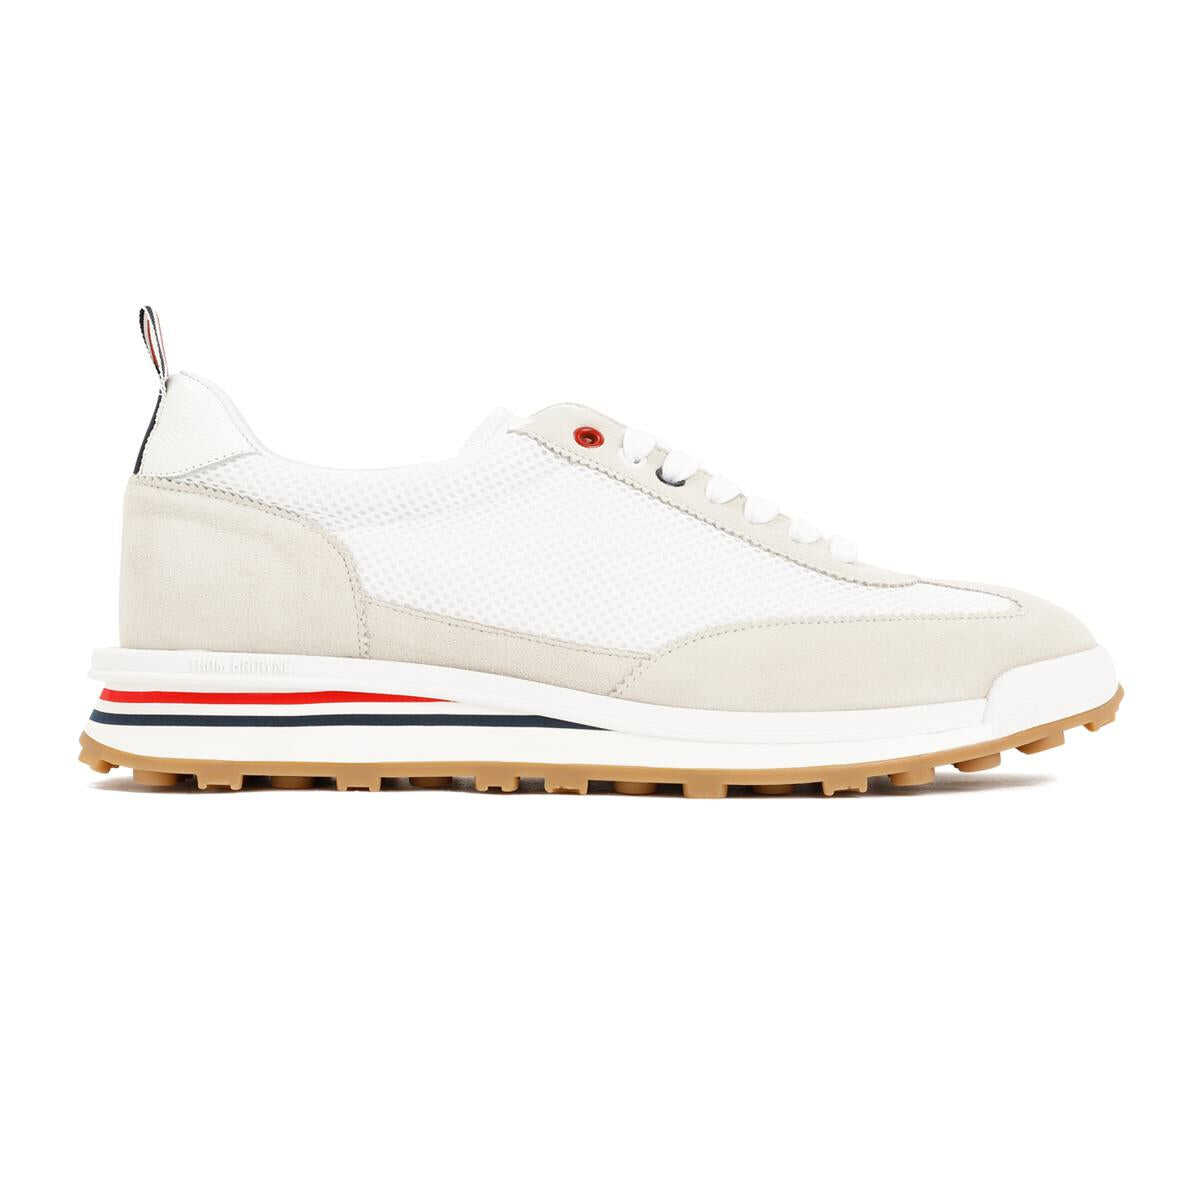 Thom Browne THOM BROWNE TECH RUNNER SNEAKERS SHOES White